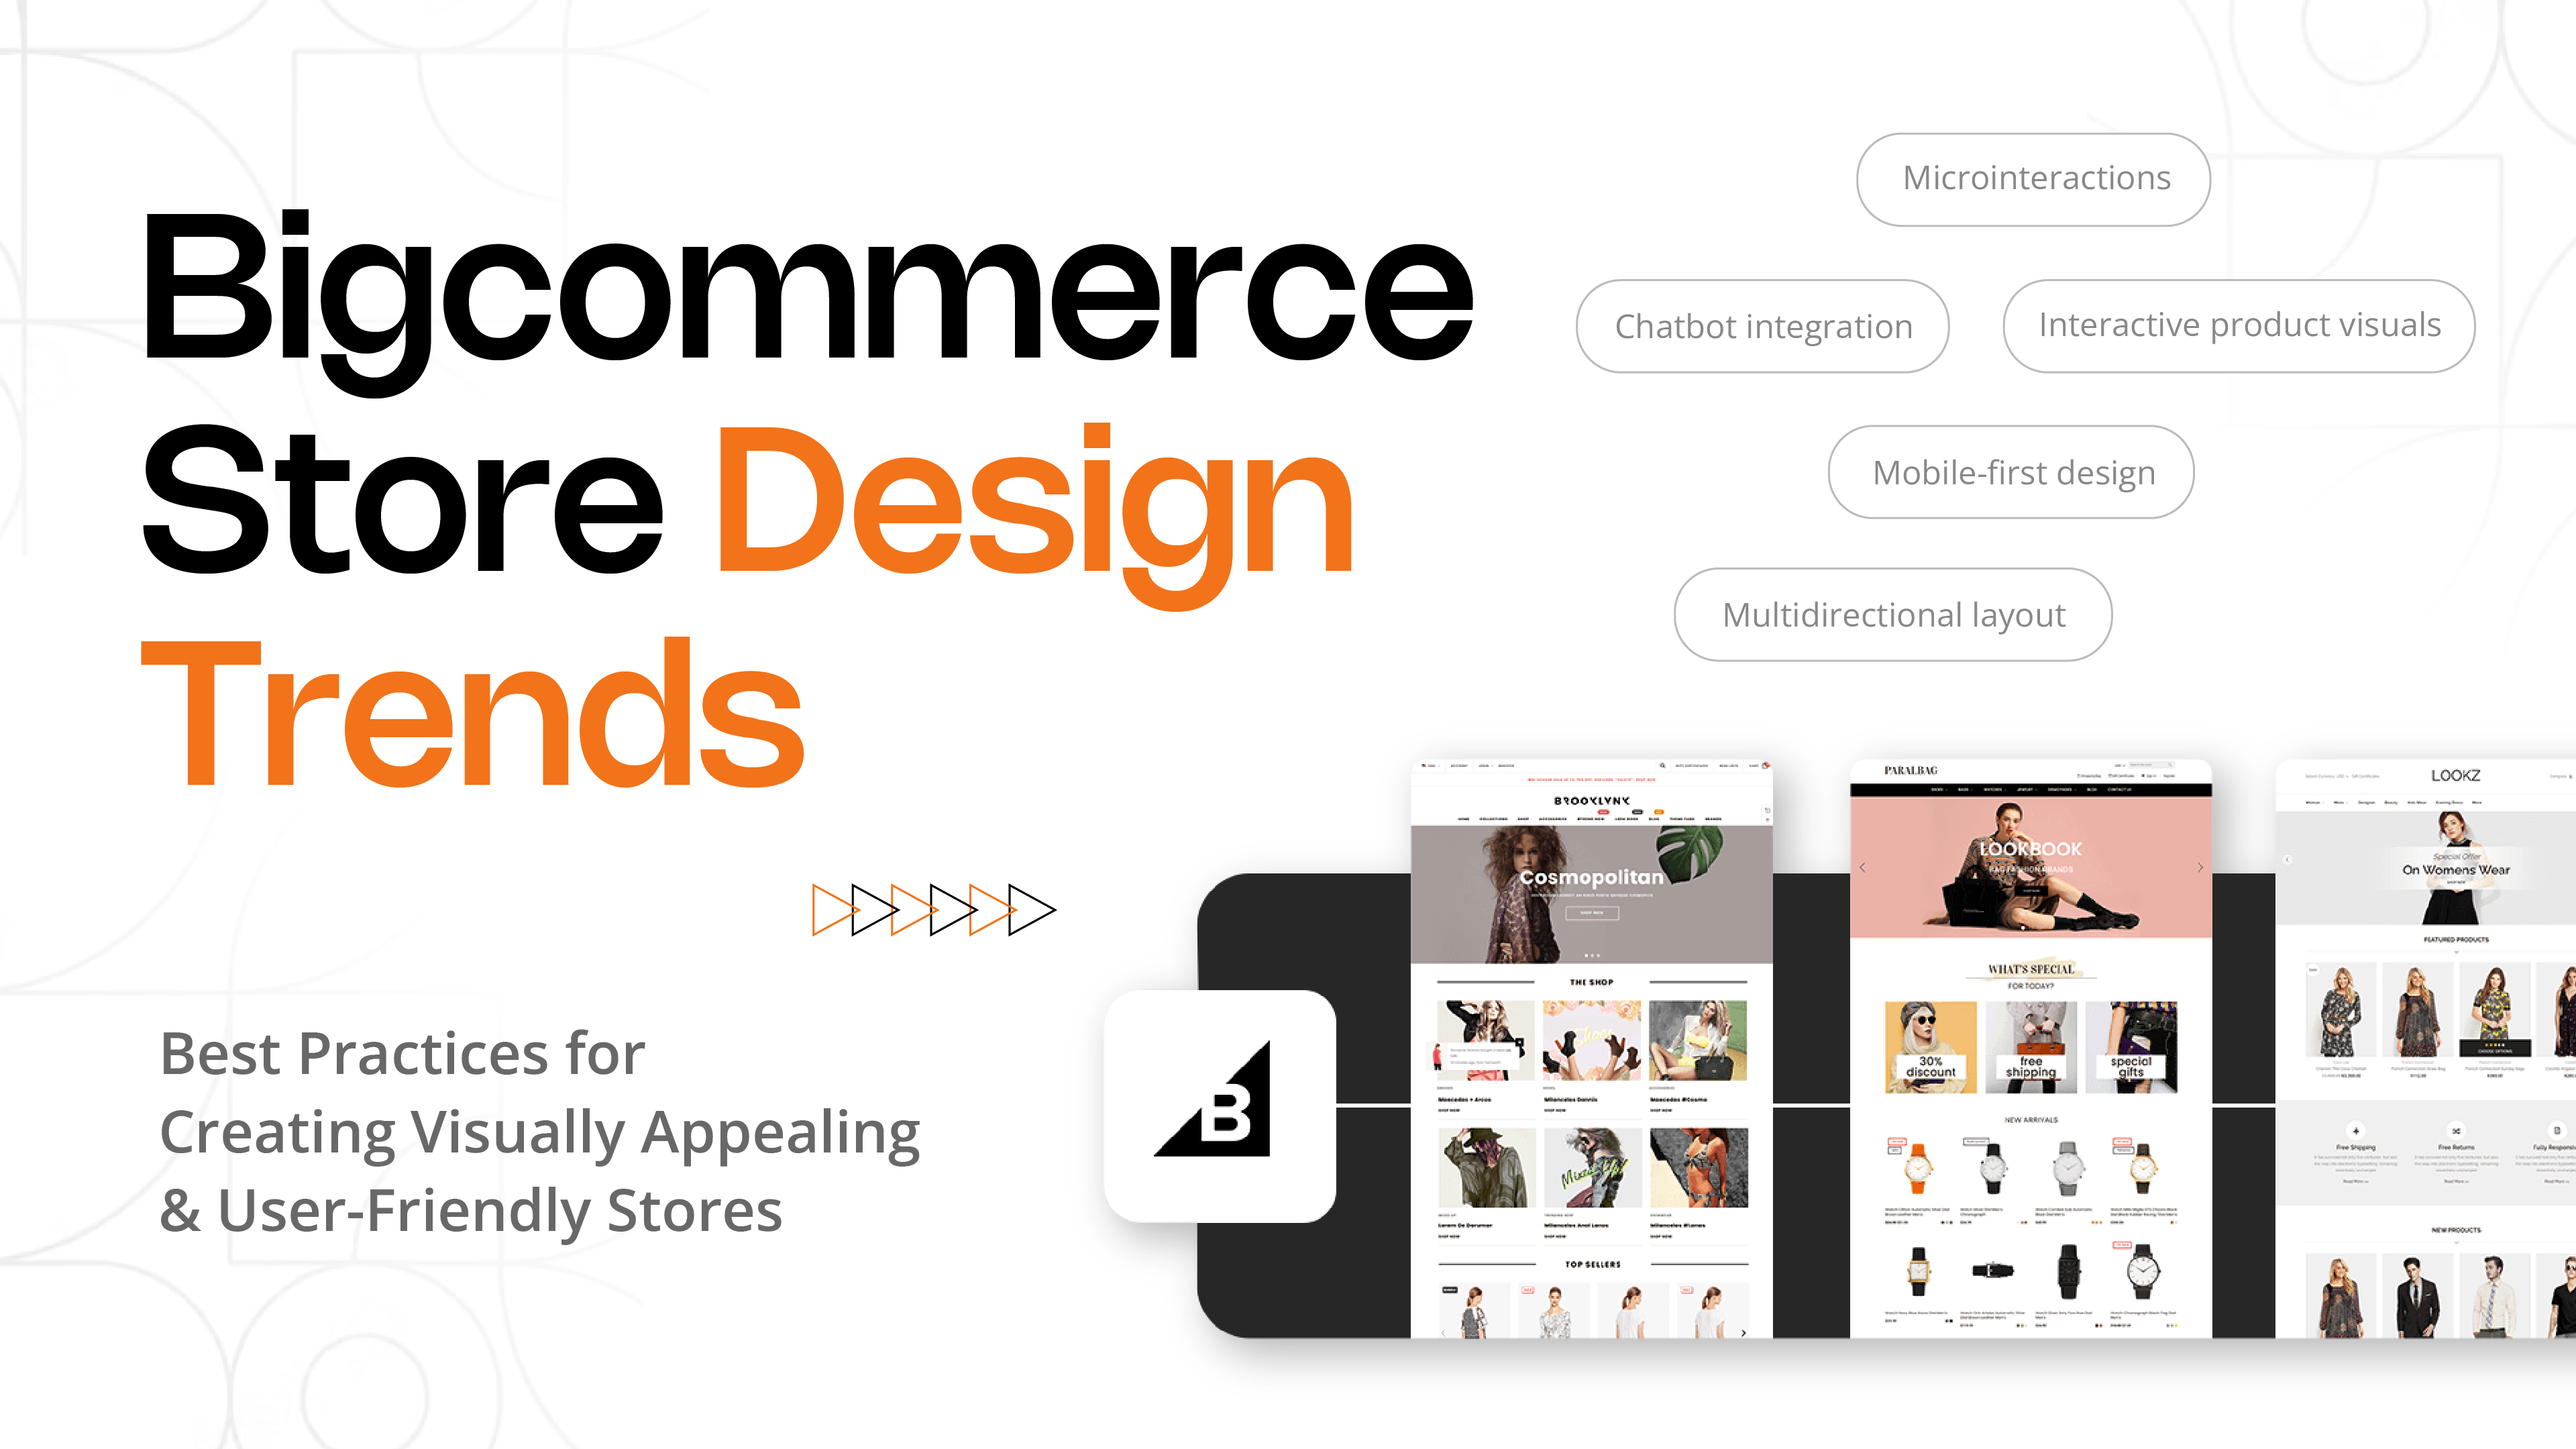 Bigcommerce Store Design Trends: Best Practices for Creating Visually Appealing and User-Friendly Stores